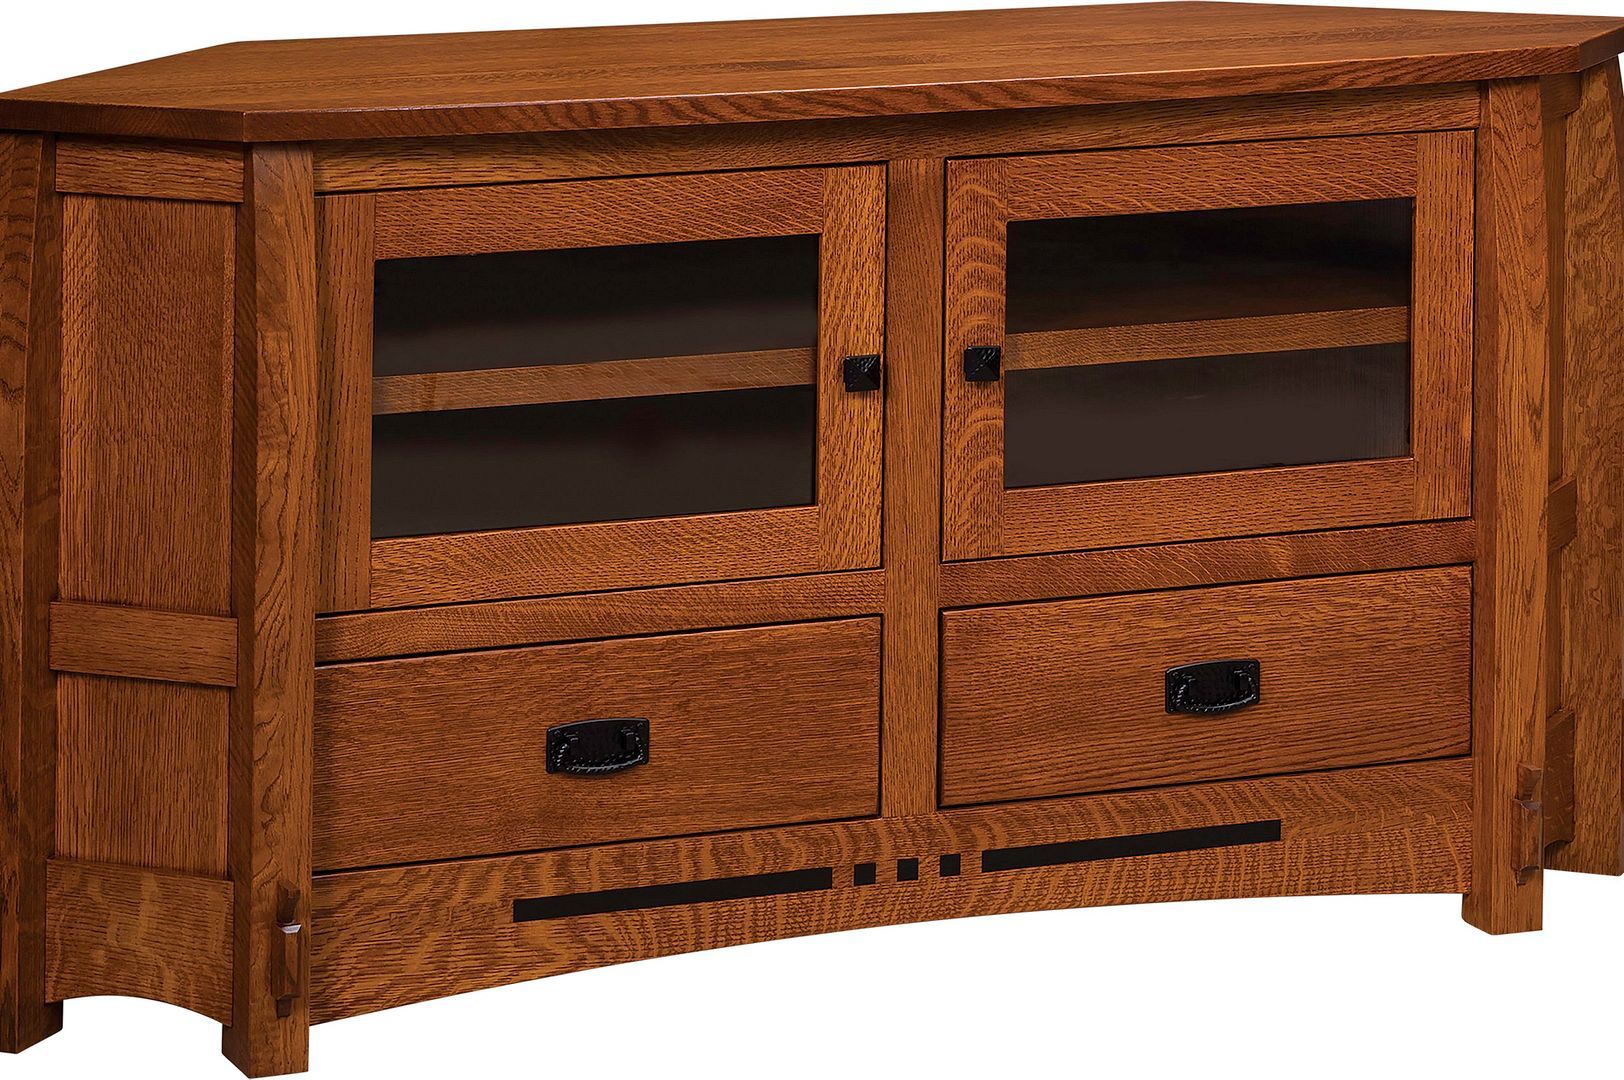 Amish Mission Colebrook Solid Wood Corner Tv Stand Console Within Oak Corner Tv Stands (View 12 of 15)